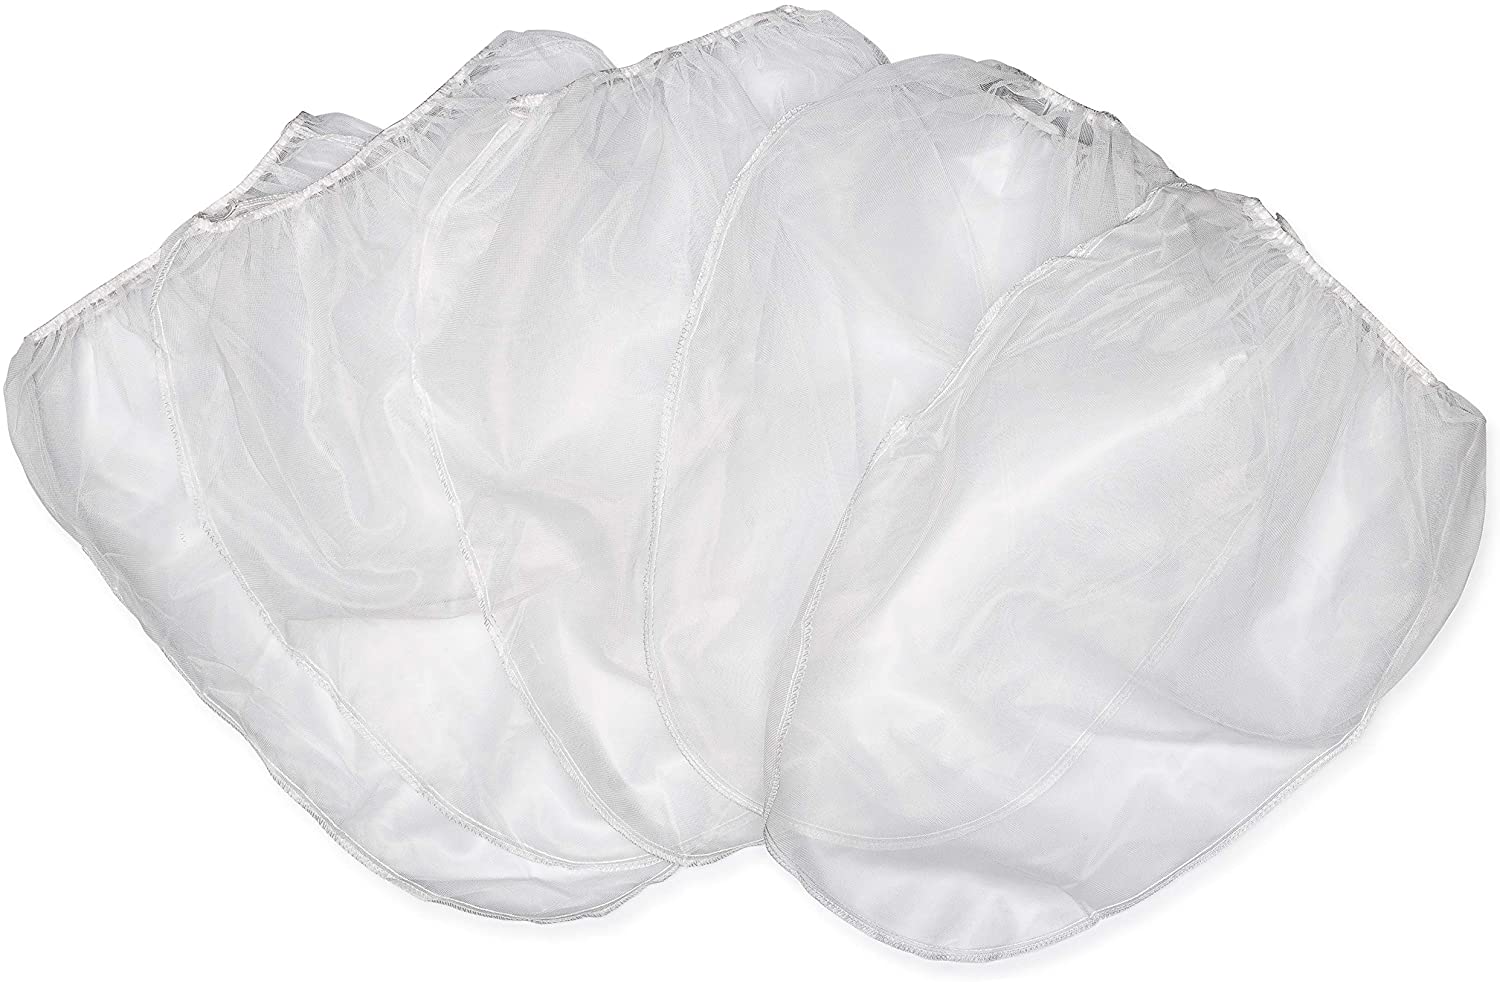 1 & 5 Gallon Paint Strainer Bags 200 Micron Fine Mesh Disposable Bag Filters with Elastic Top